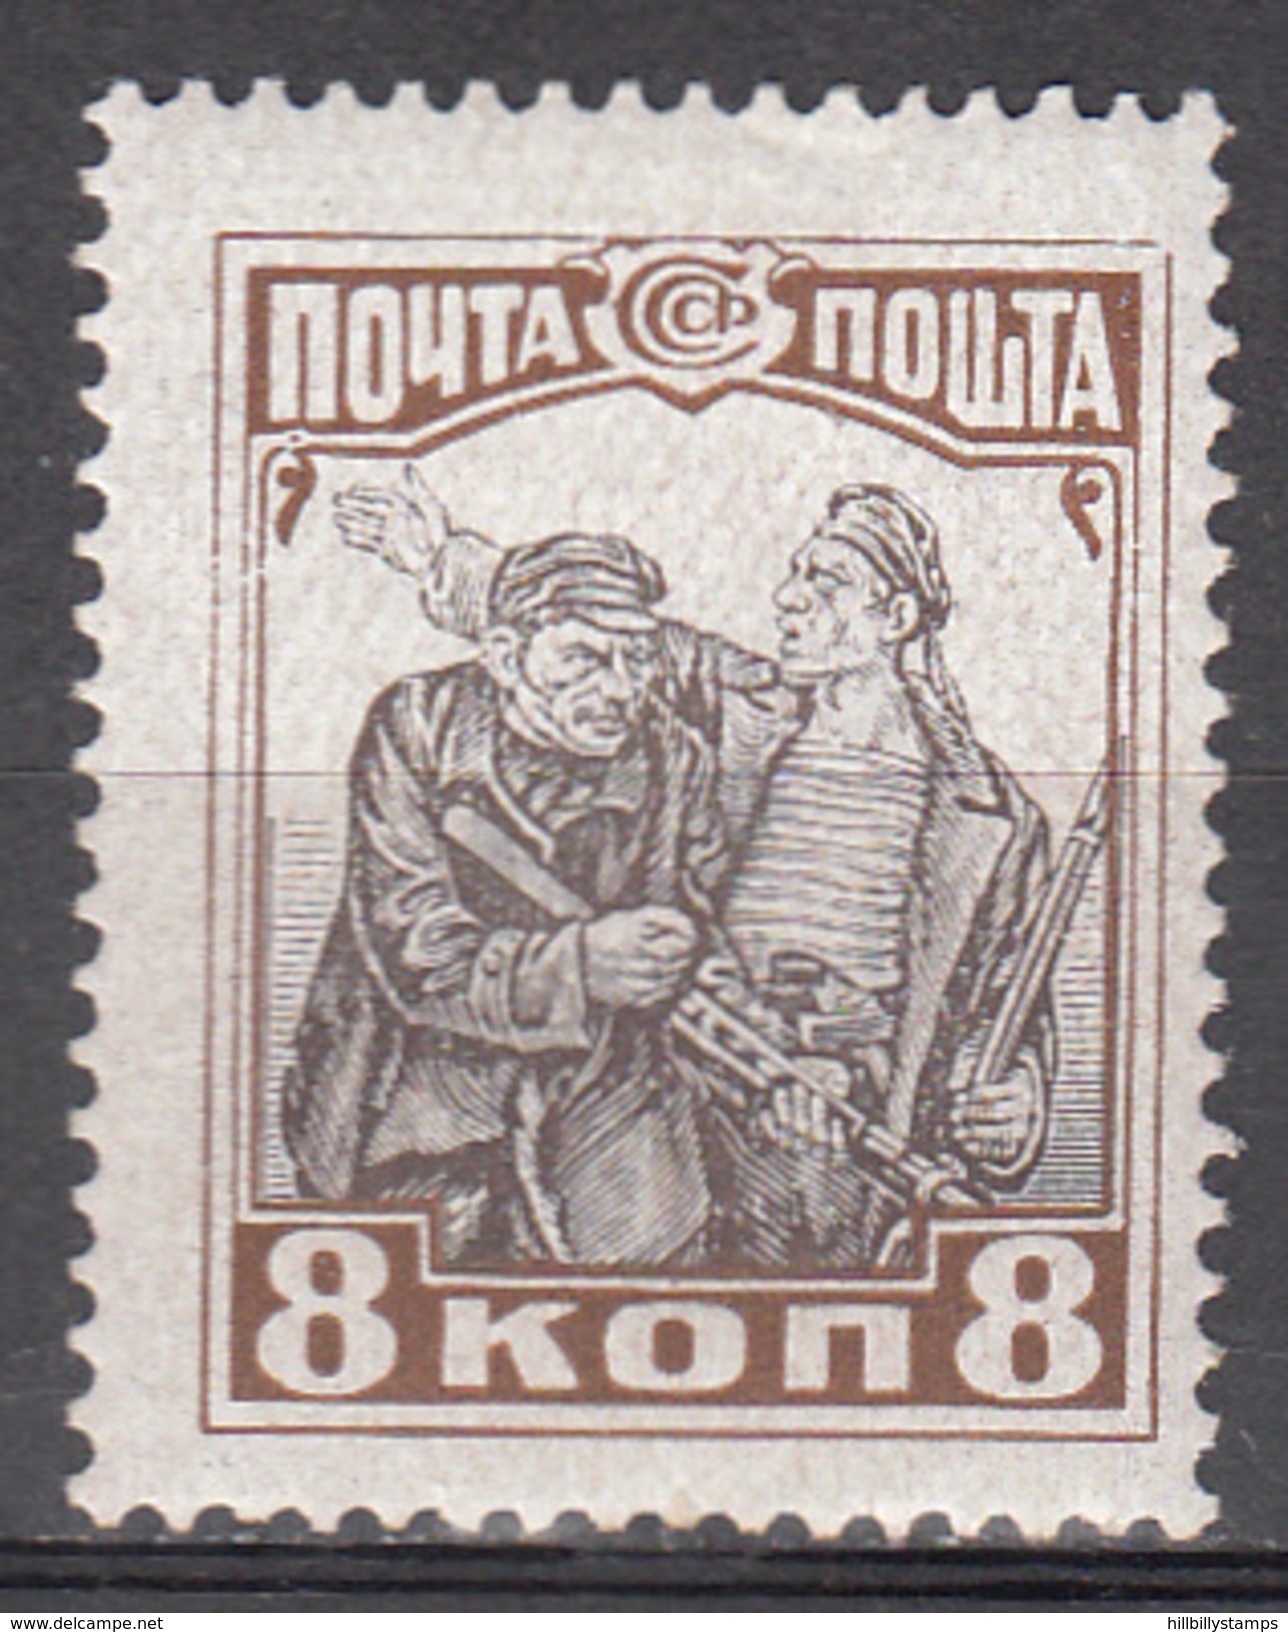 RUSSIA       SCOTT NO.  378     MINT HINGED      YEAR  1927 - Unused Stamps